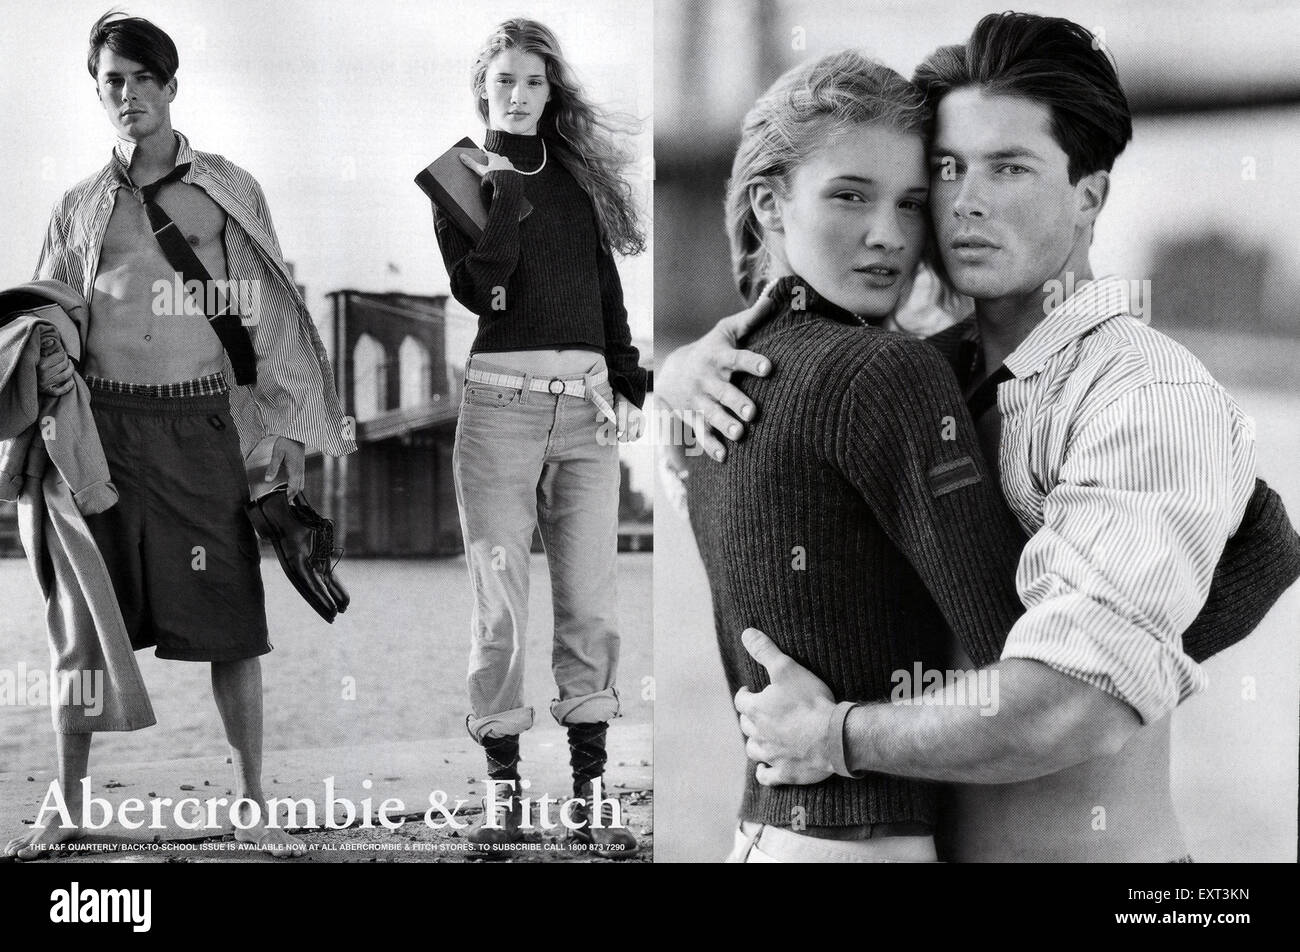 2000s USA Abercrombie and Fitch Magazine Advert Stock Photo